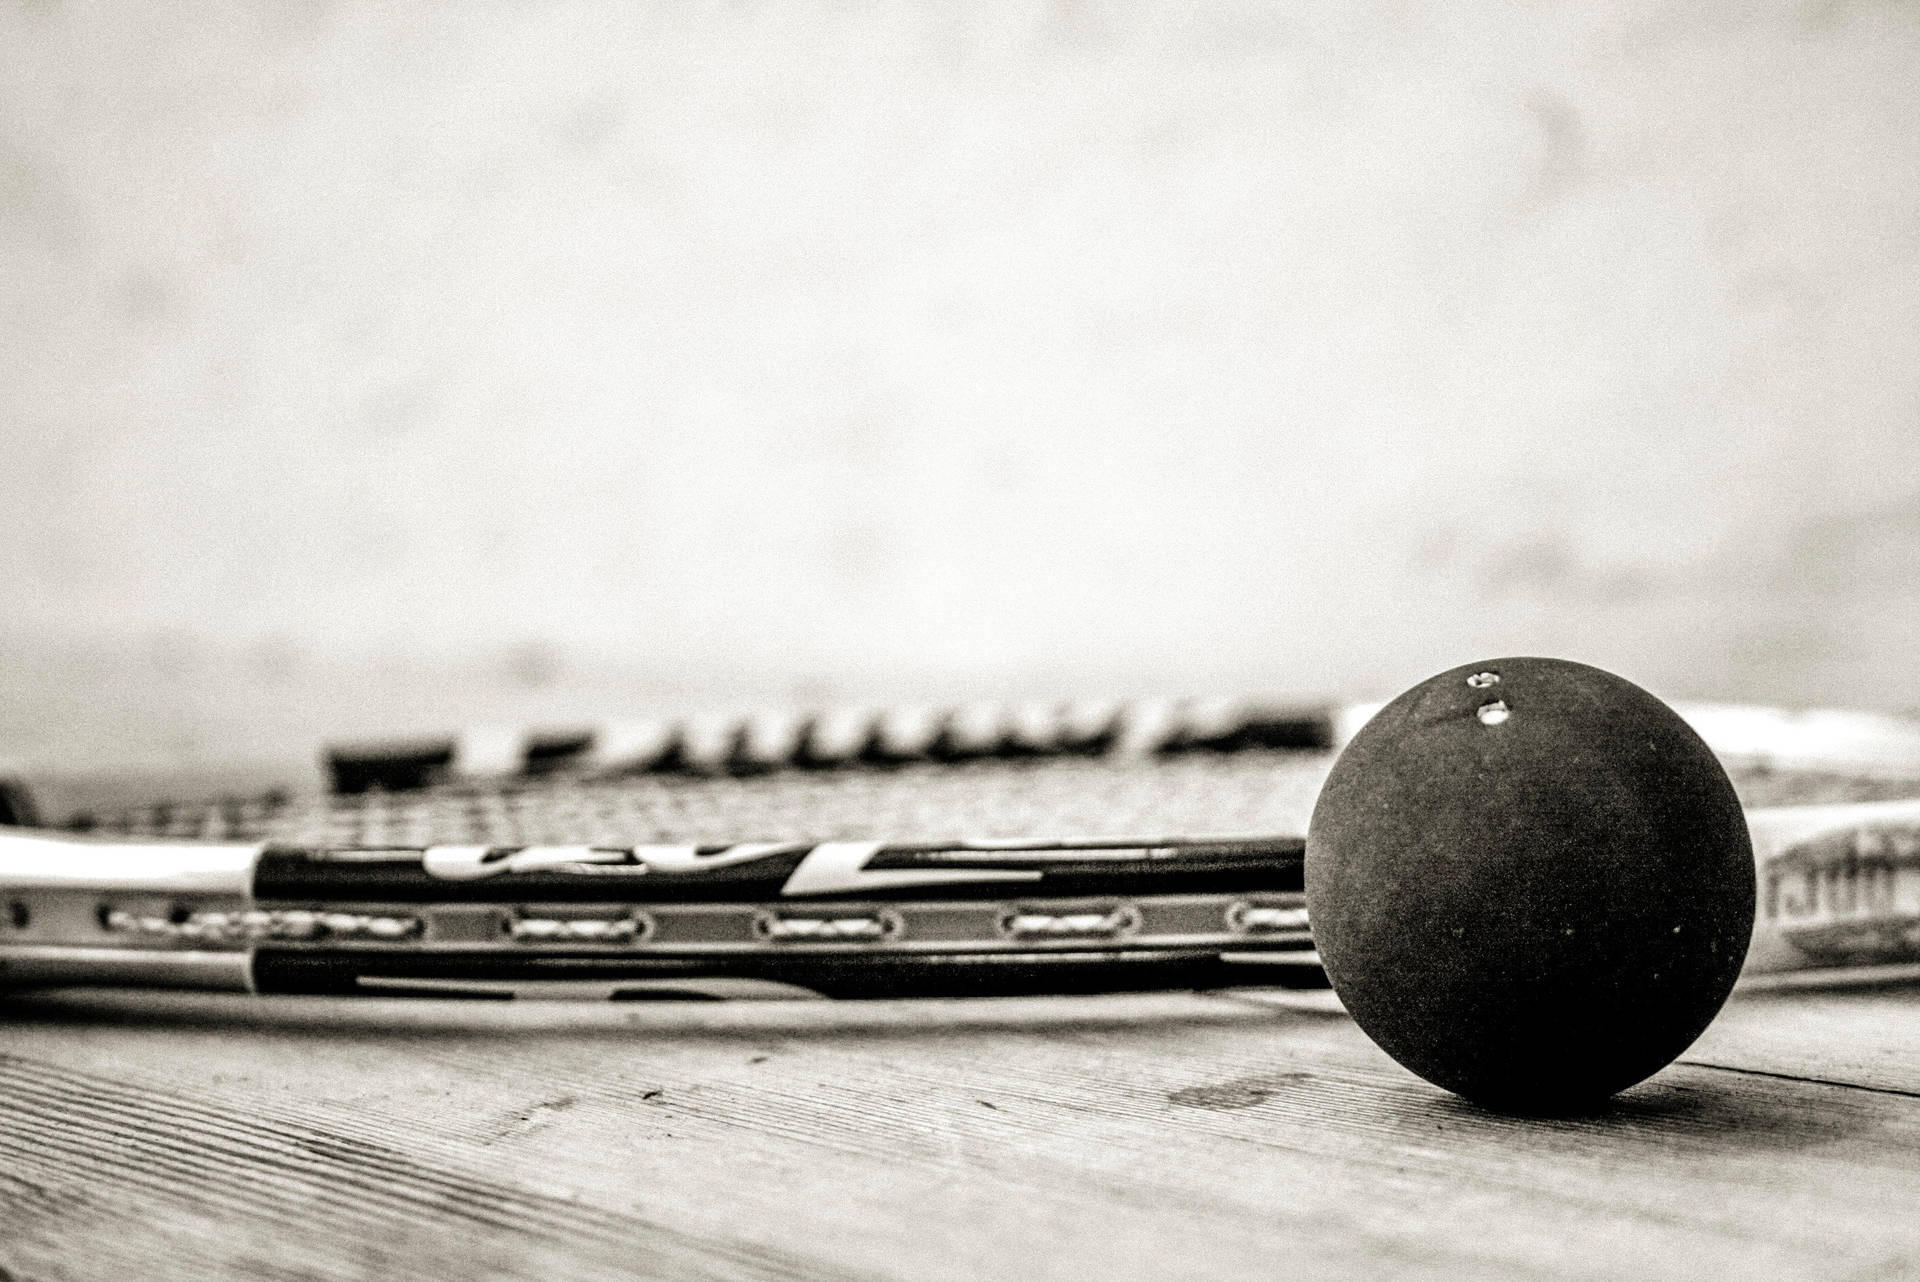 Squash Racket And Ball Grayscale Background